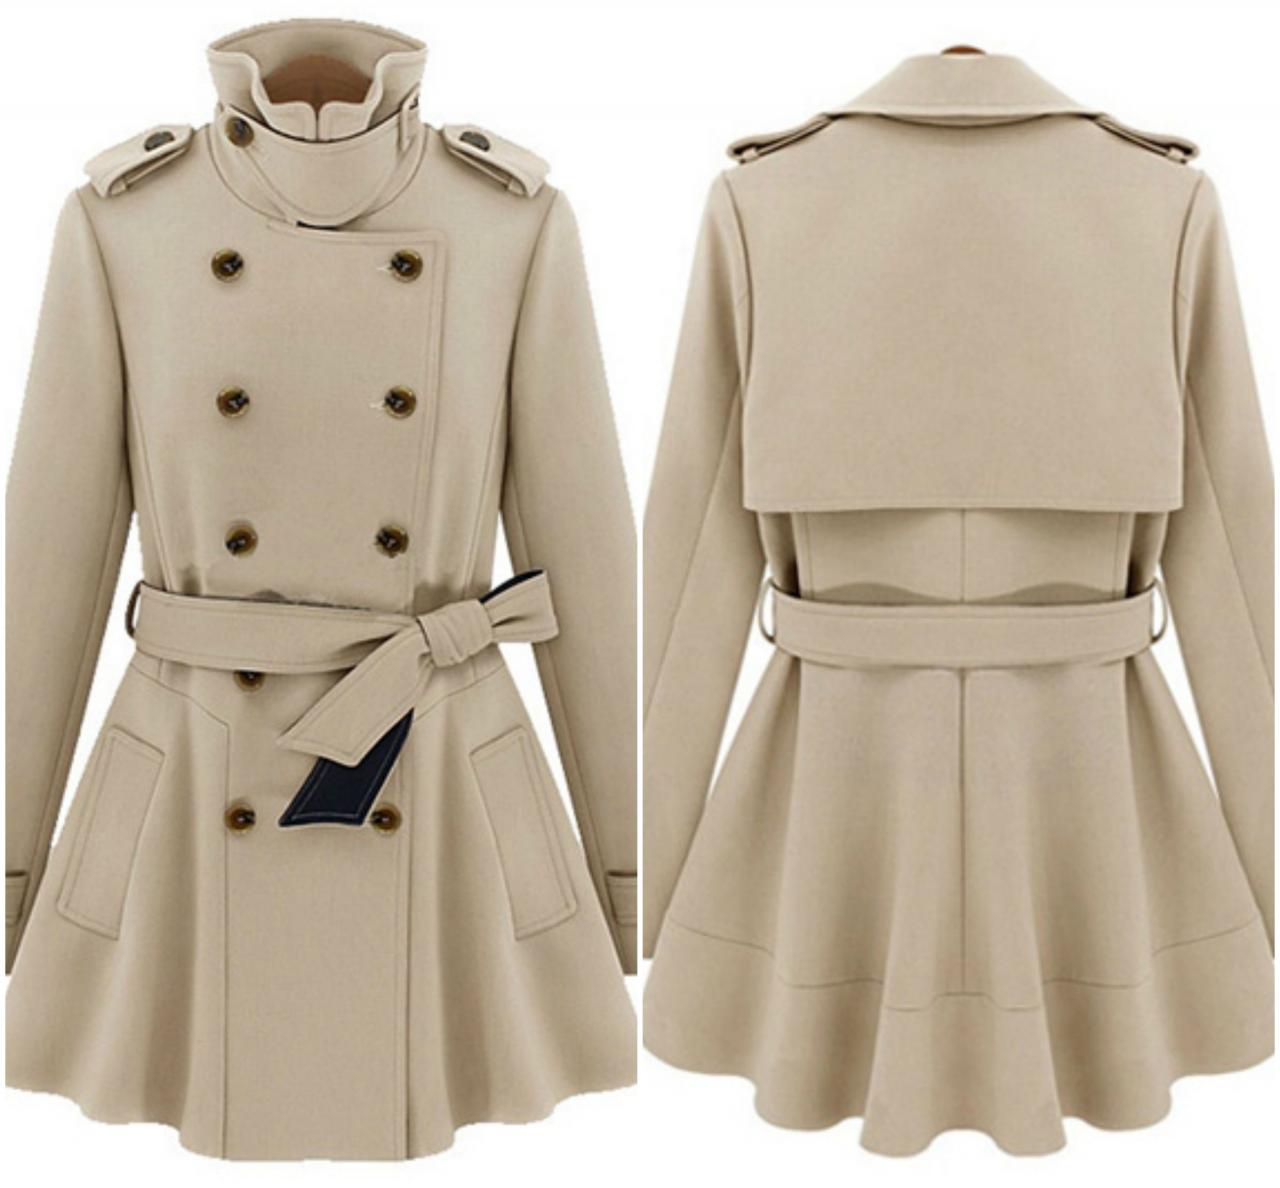 Stylish Double Breasted Turn Down Collar Trench Coat 2qdhvpfznrrxupddlbgo0 D51y5bh0jso